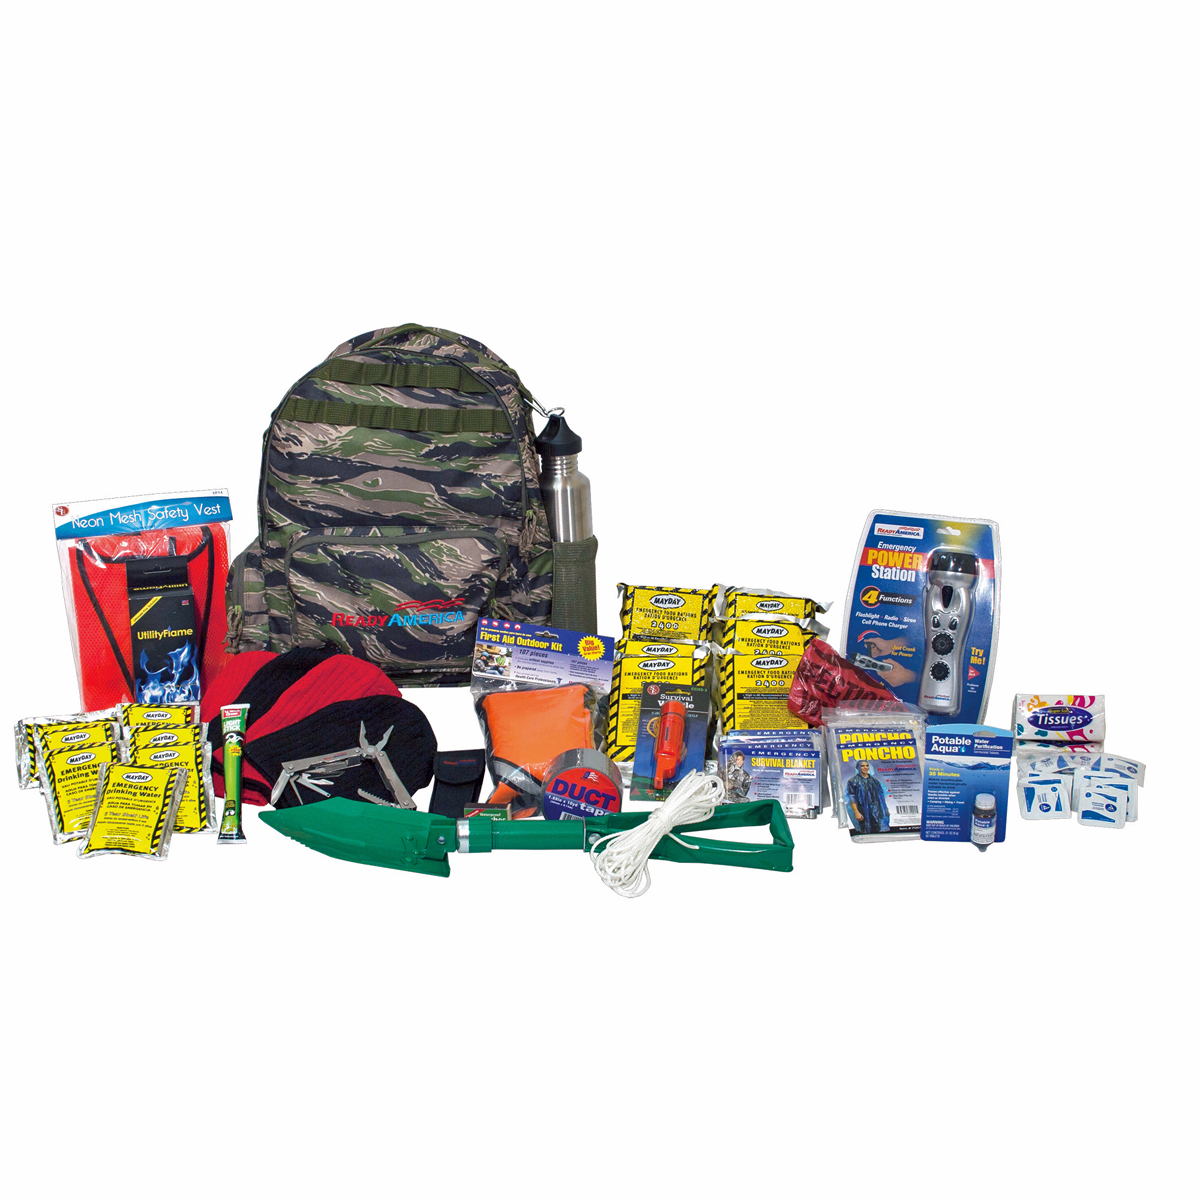 Deluxe Outdoor Survival Kit 4-Person